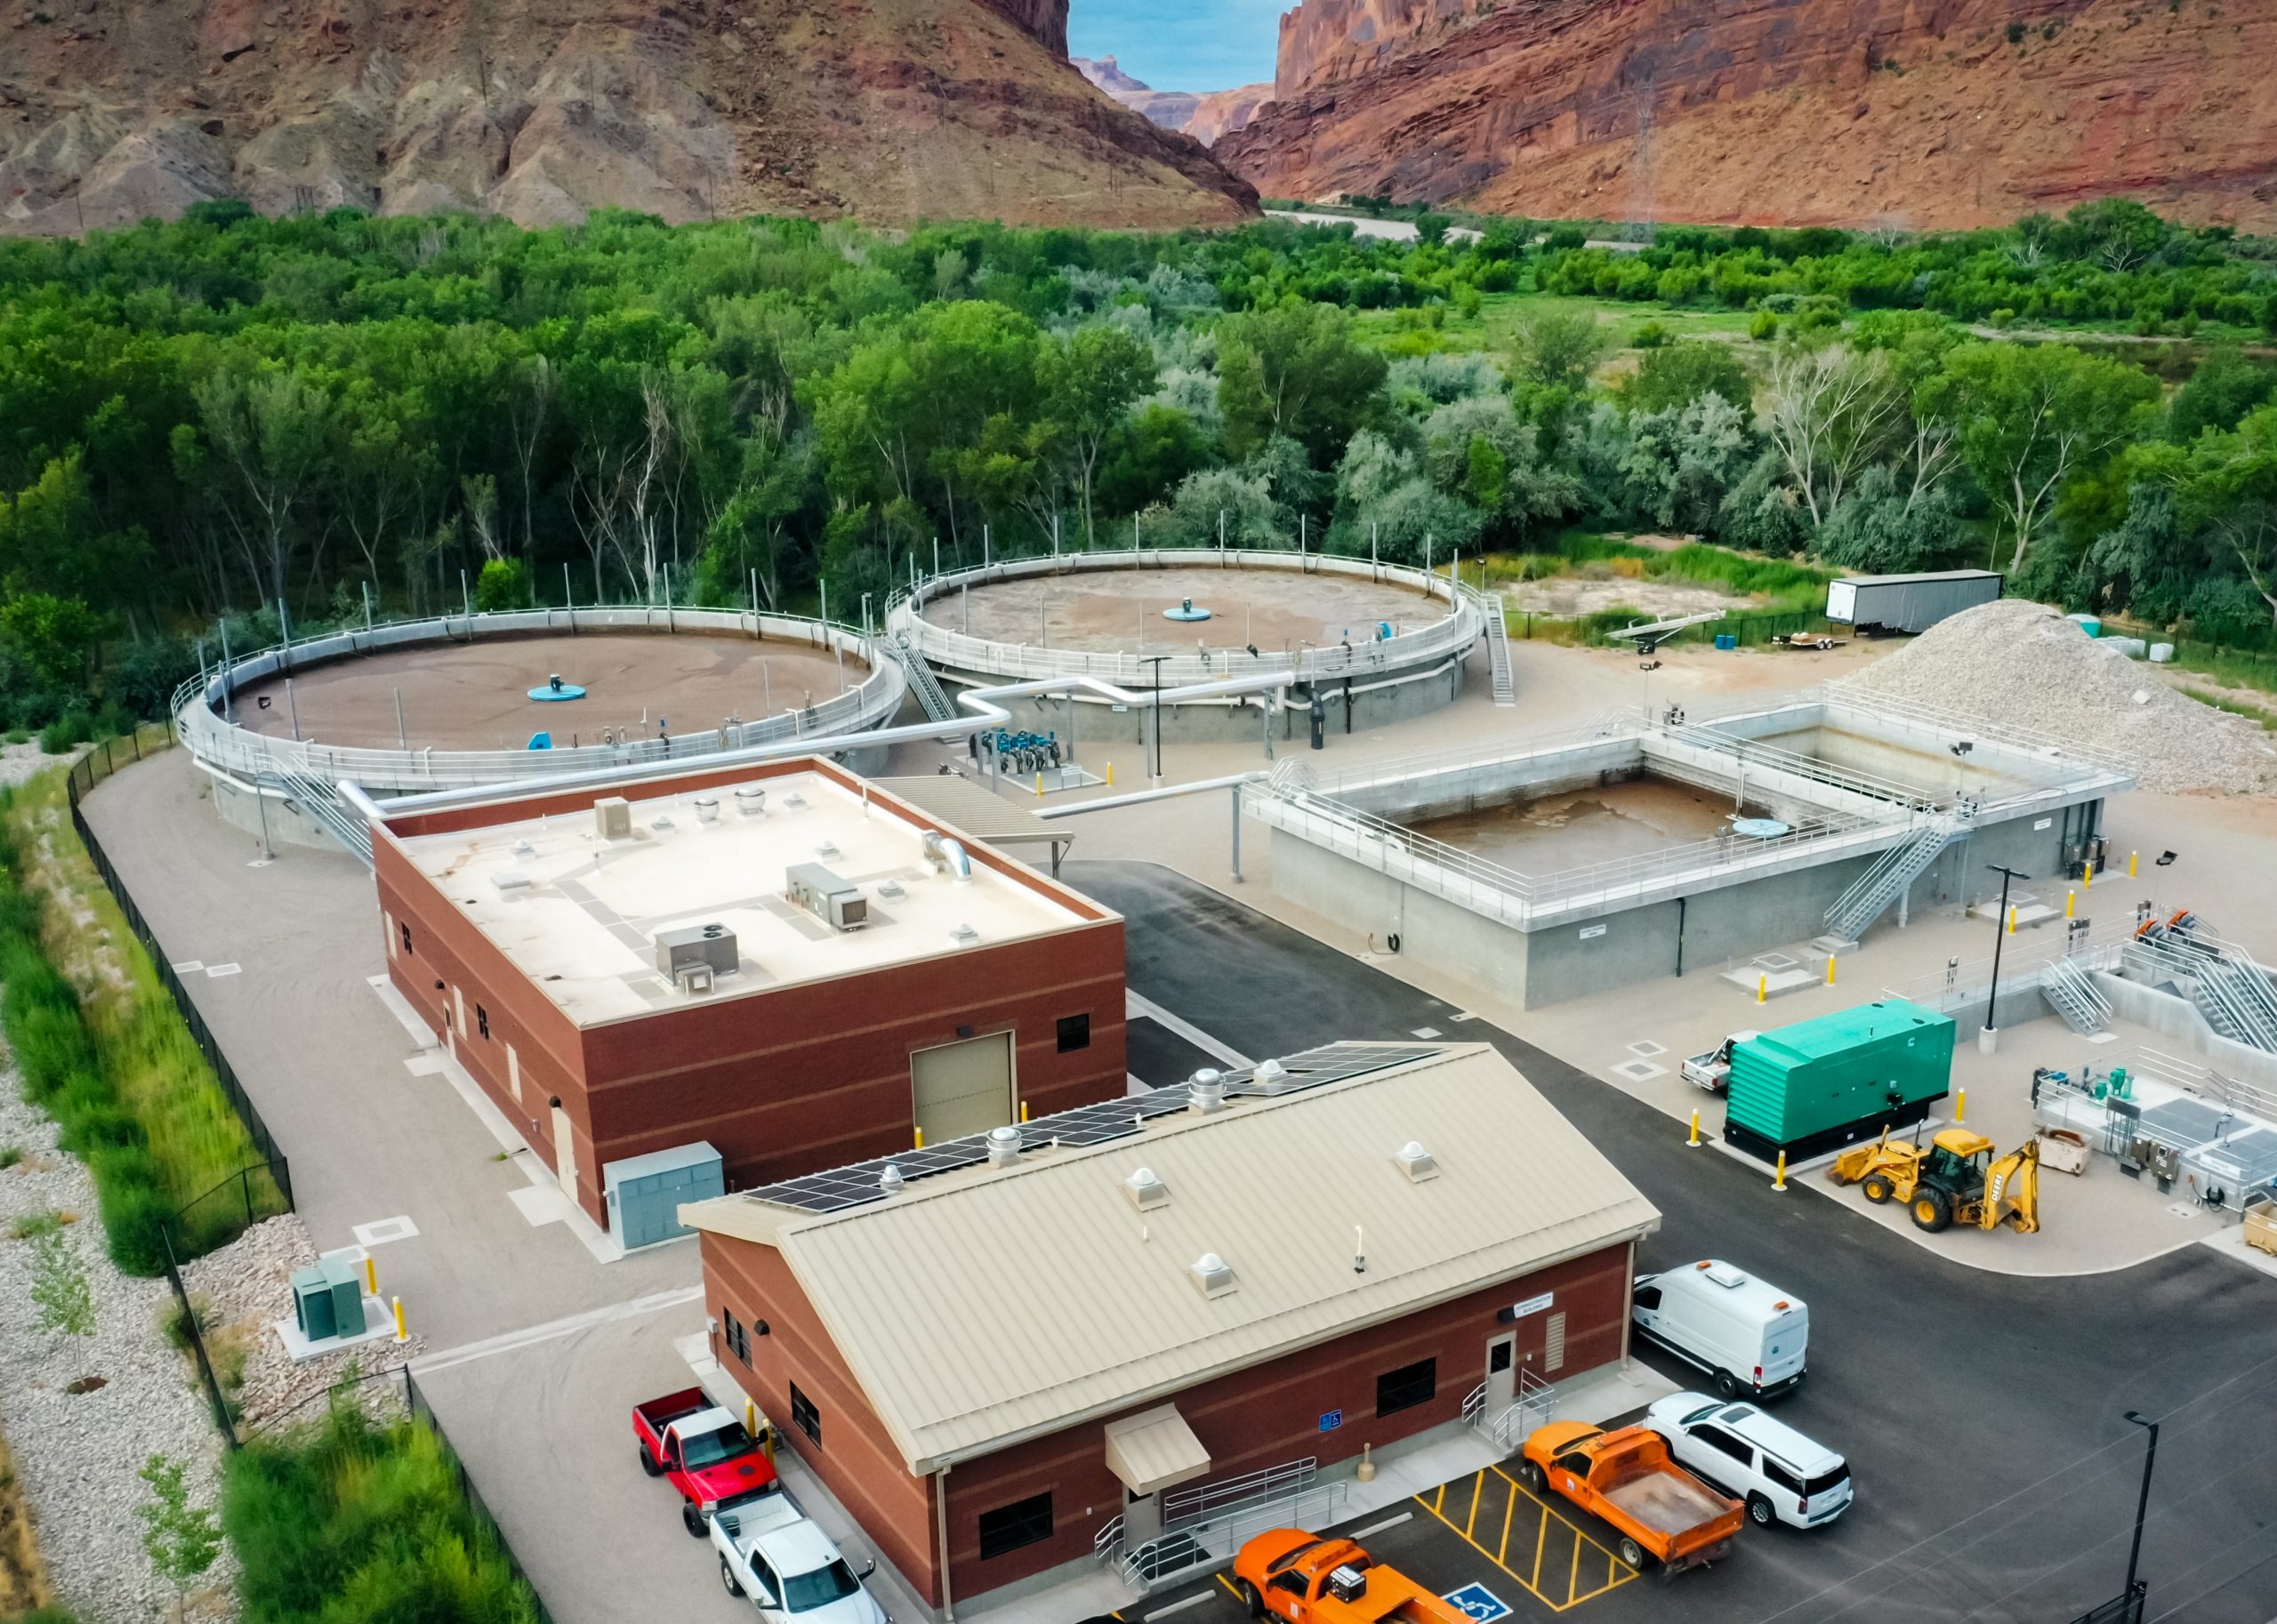 Moab City Water Reclamation Facility